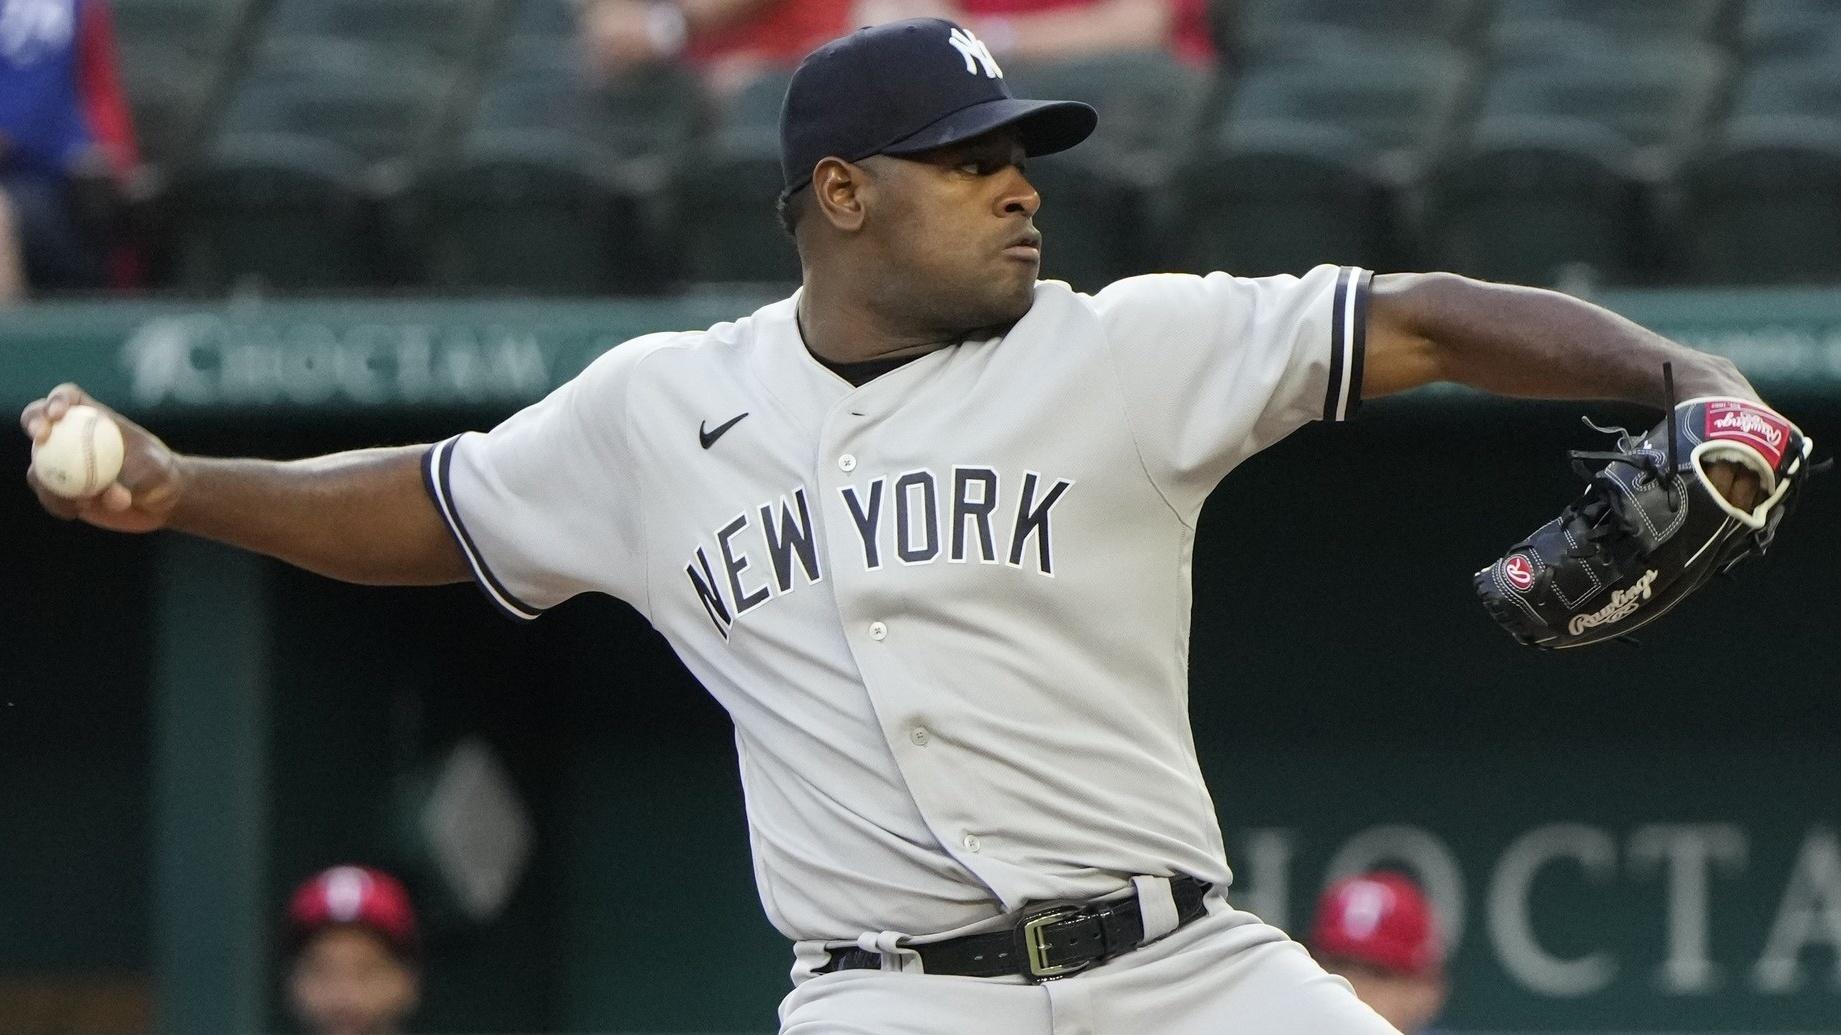 Oct 3, 2022; Arlington, Texas, USA; New York Yankees starting pitcher Luis Severino (40) delivers a pitch to the Texas Rangers during the first inning at Globe Life Field. / Jim Cowsert-USA TODAY Sports